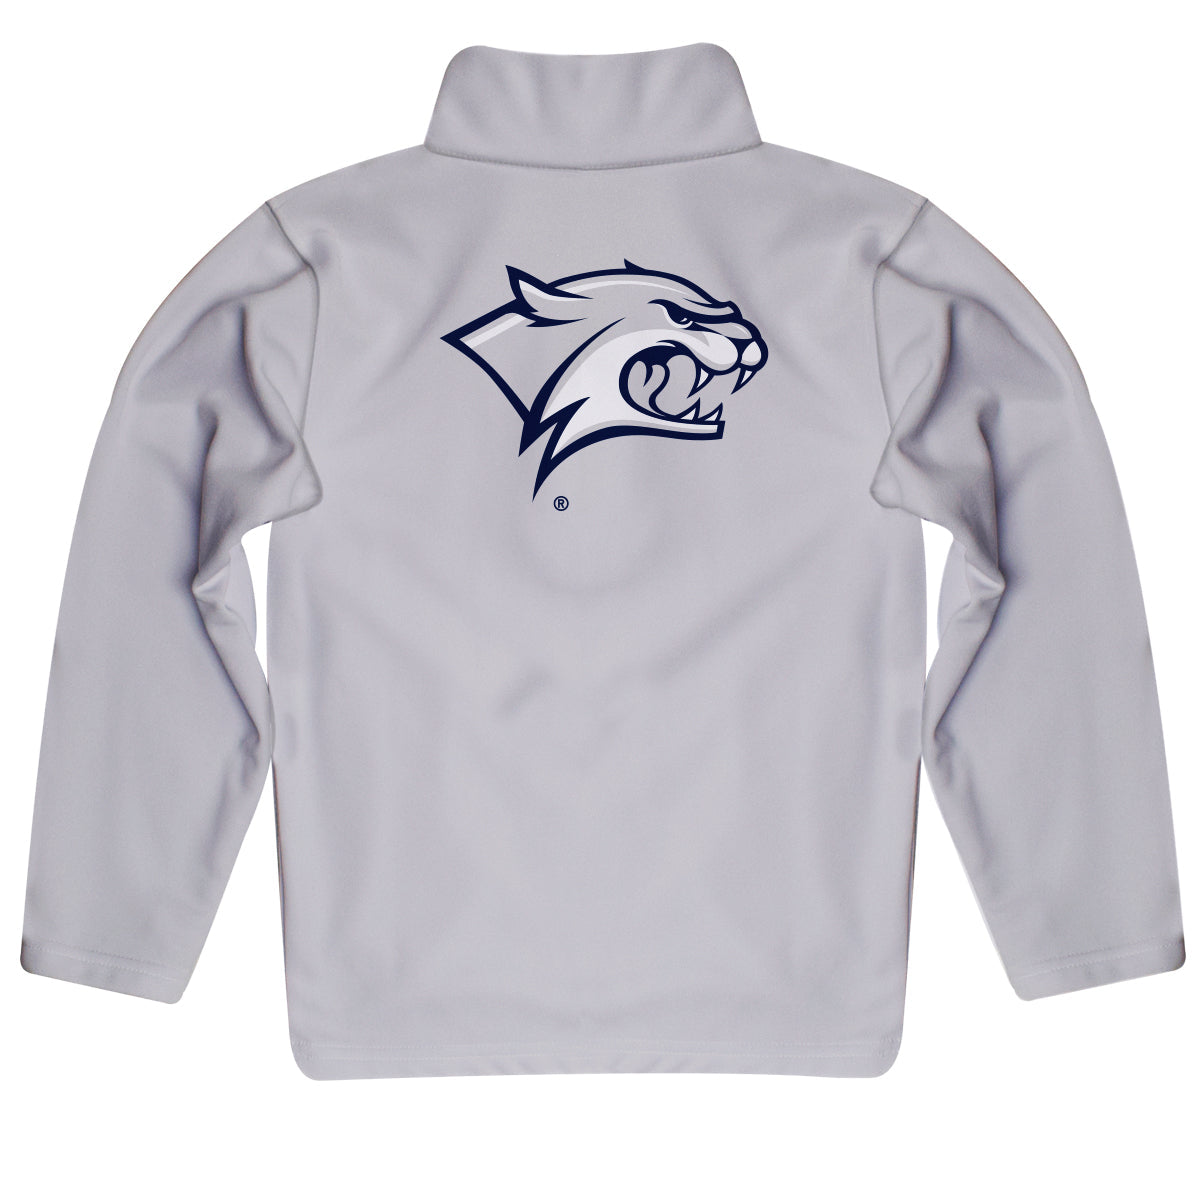 New Hampshire Wildcats UNH Game Day Solid Gray Quarter Zip Pullover for Infants Toddlers by Vive La Fete